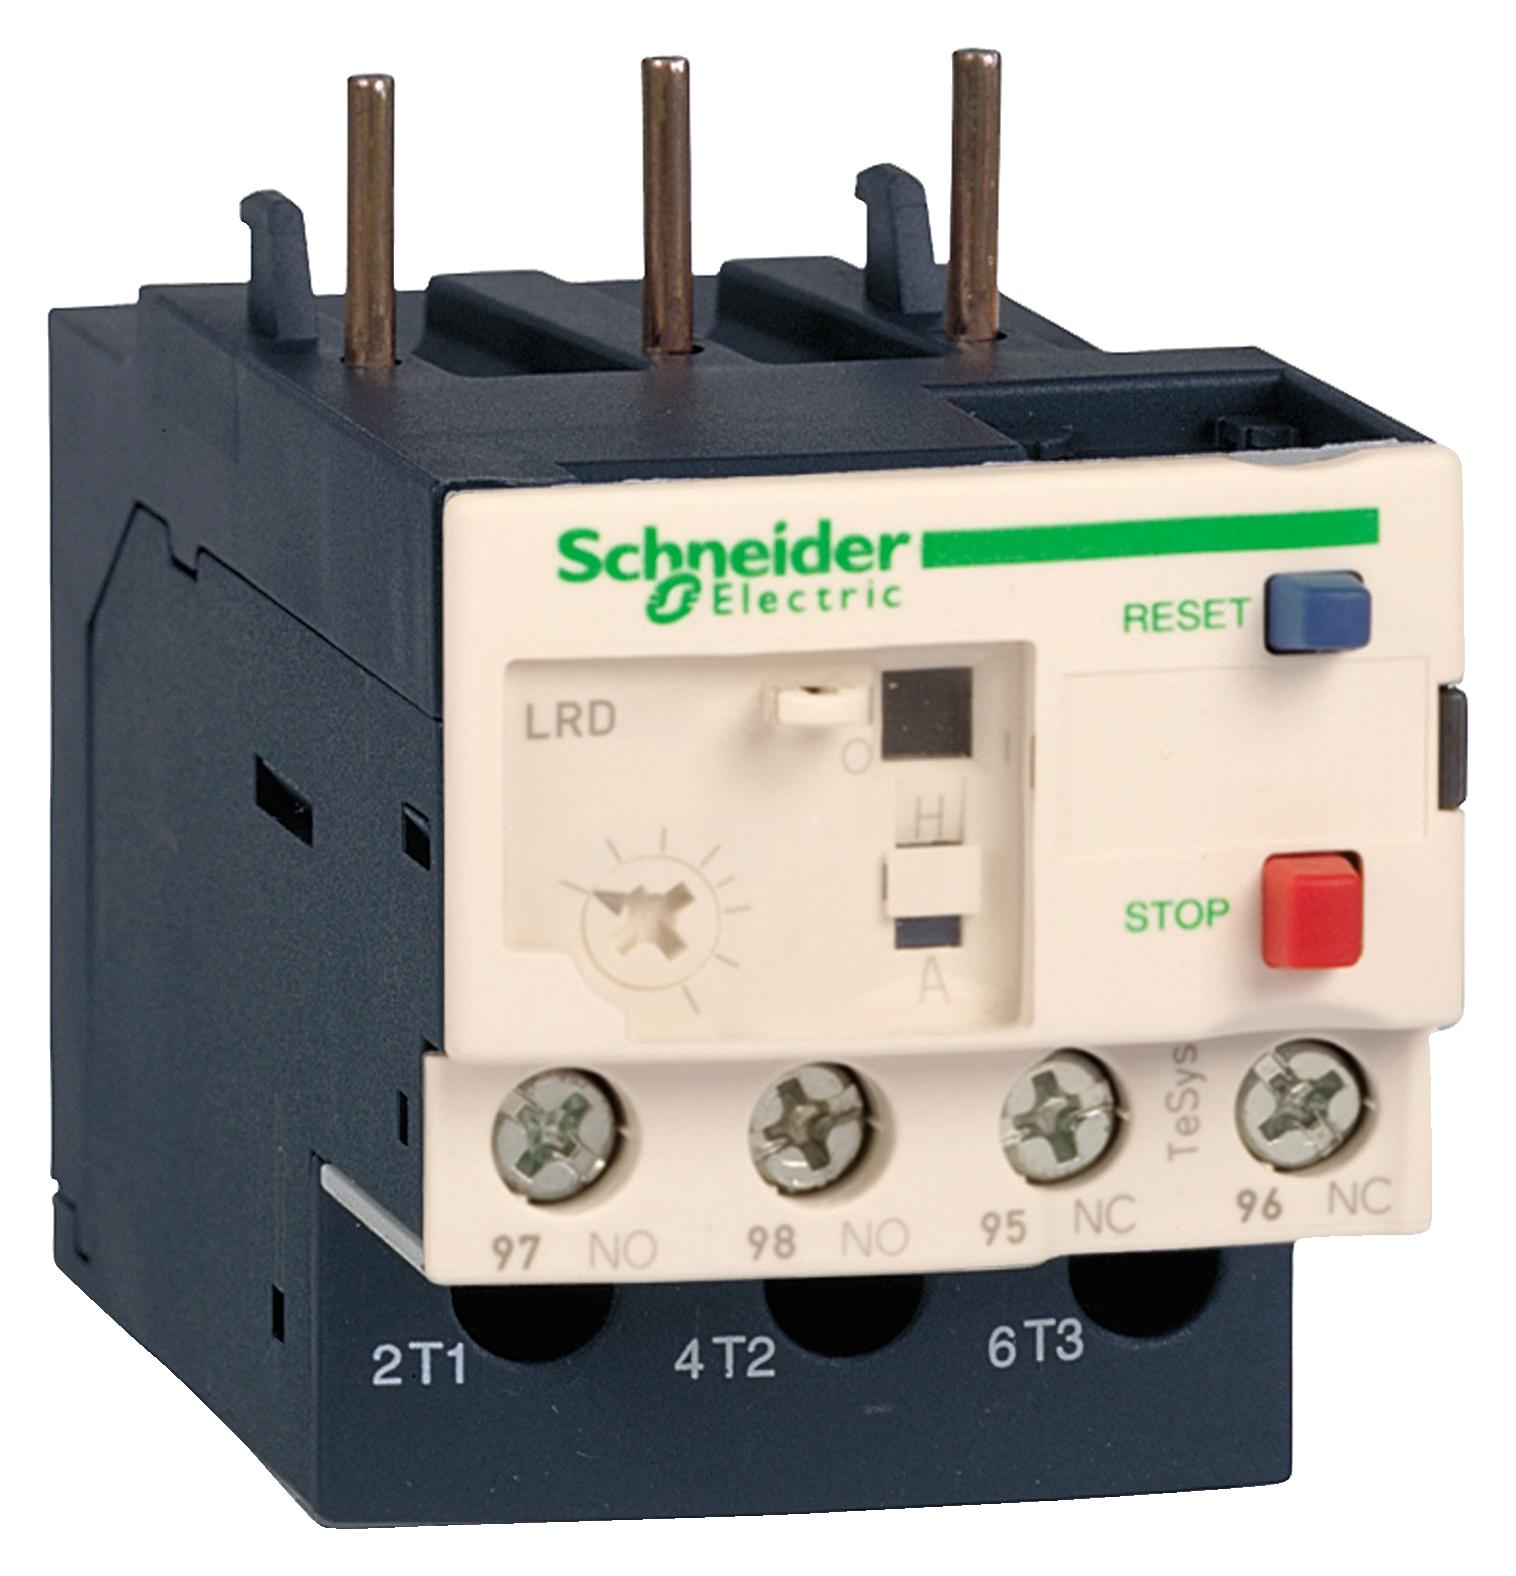 LR3D076 THERMAL OVERLOAD RELAY, 1.6A-2.5A, 690V SCHNEIDER ELECTRIC